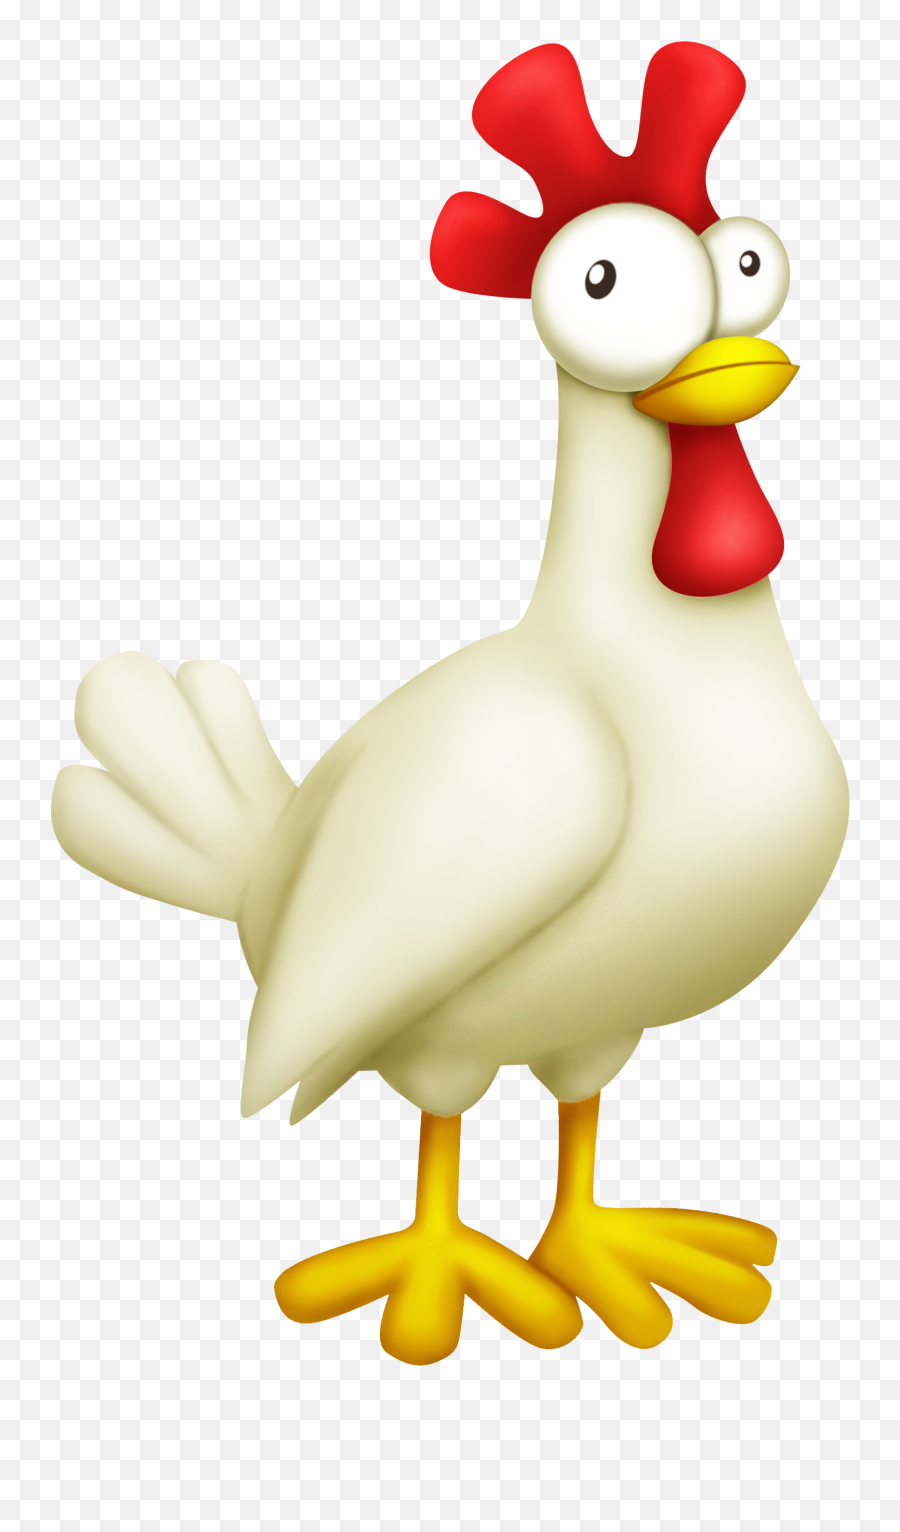 Flying Bird Water Hay Hq Png Image - Hay Day Chicken,Hay Png